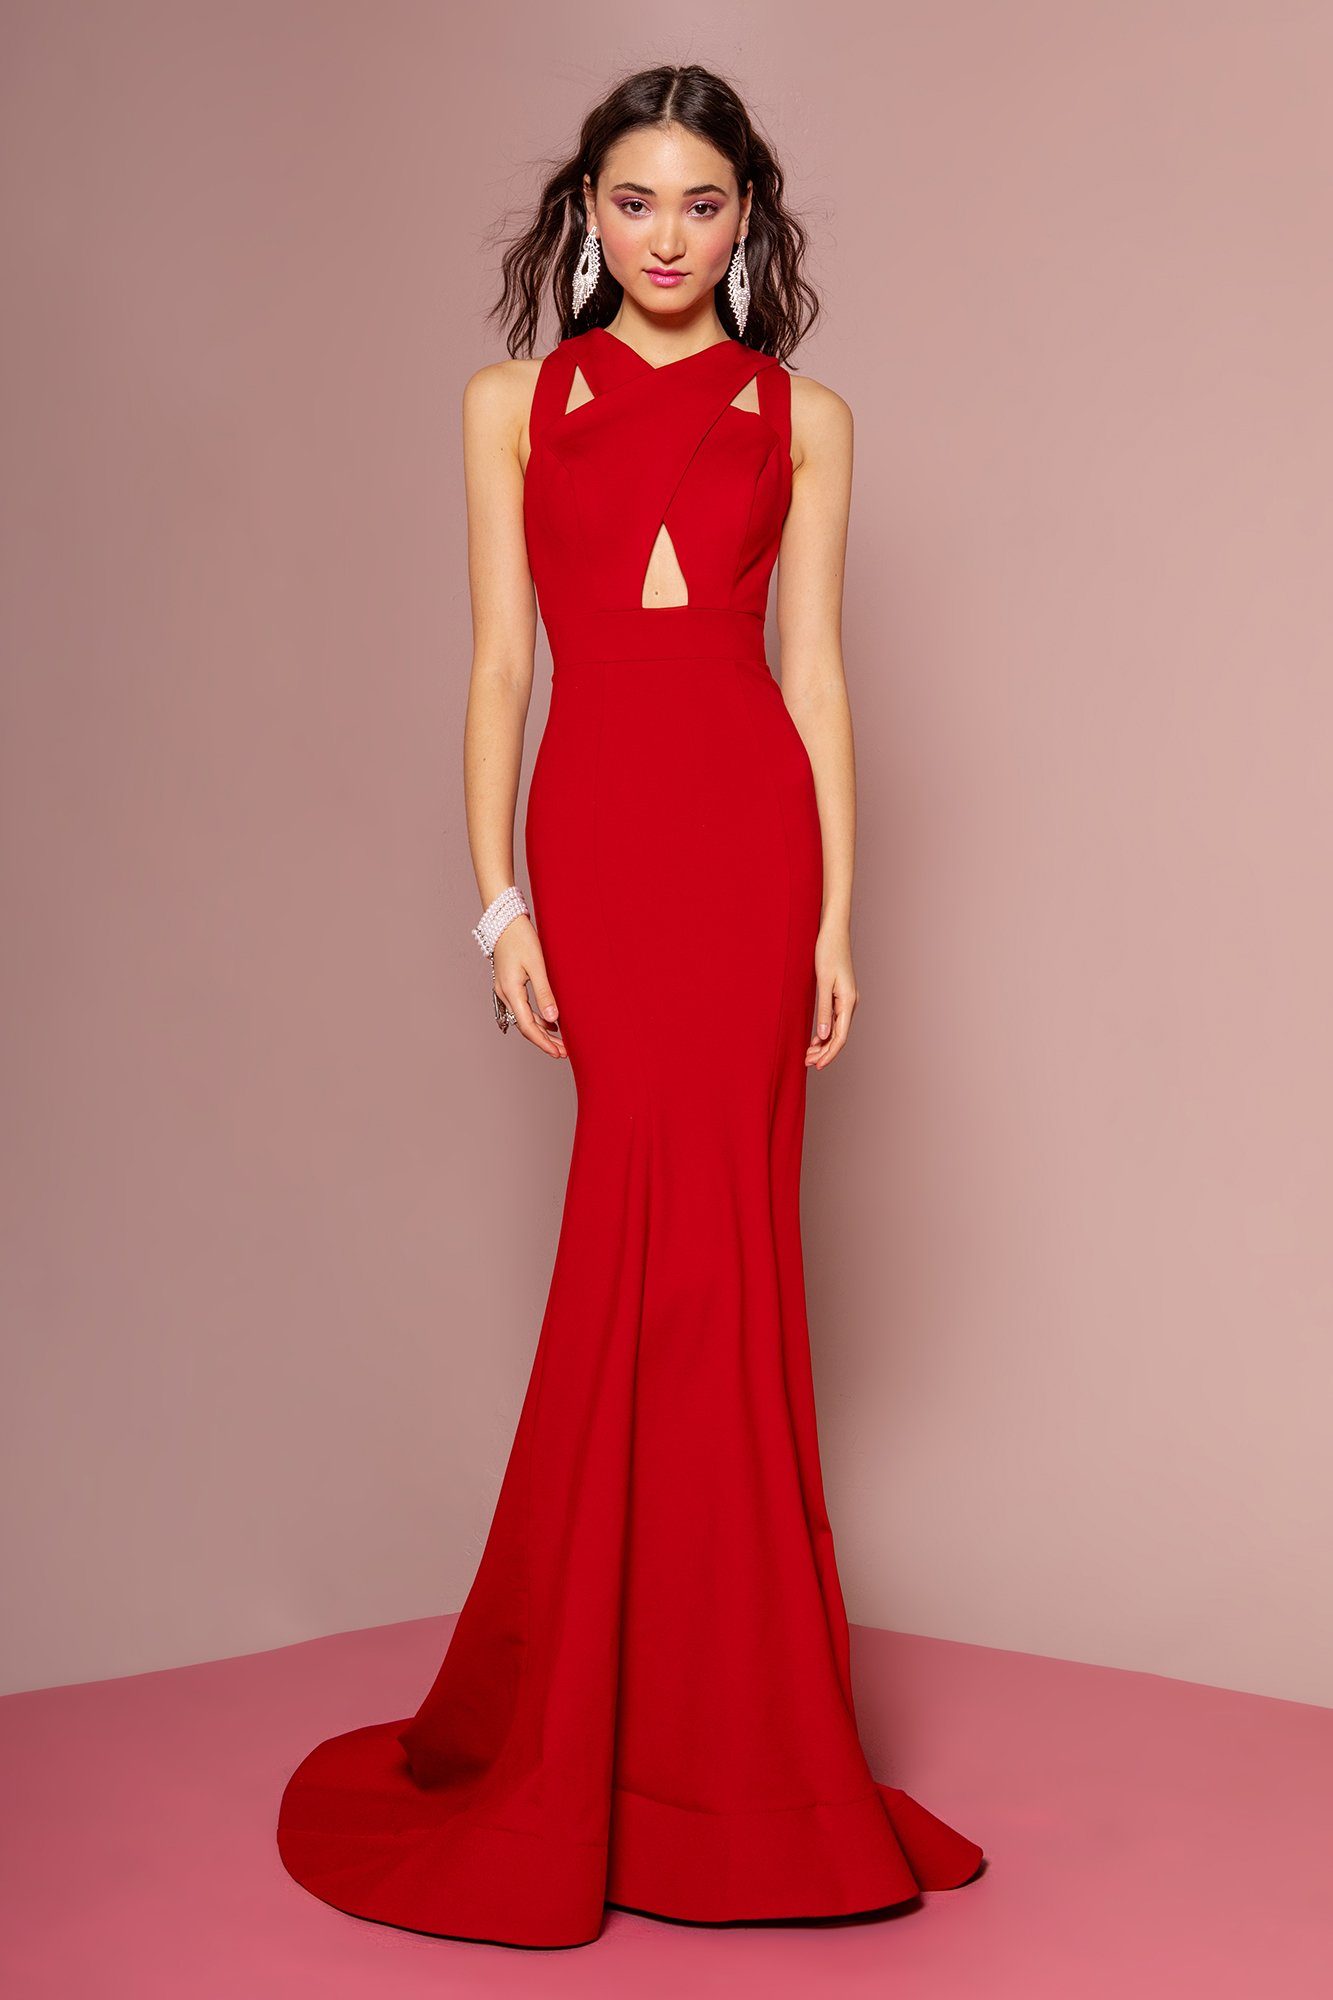 red evening gown